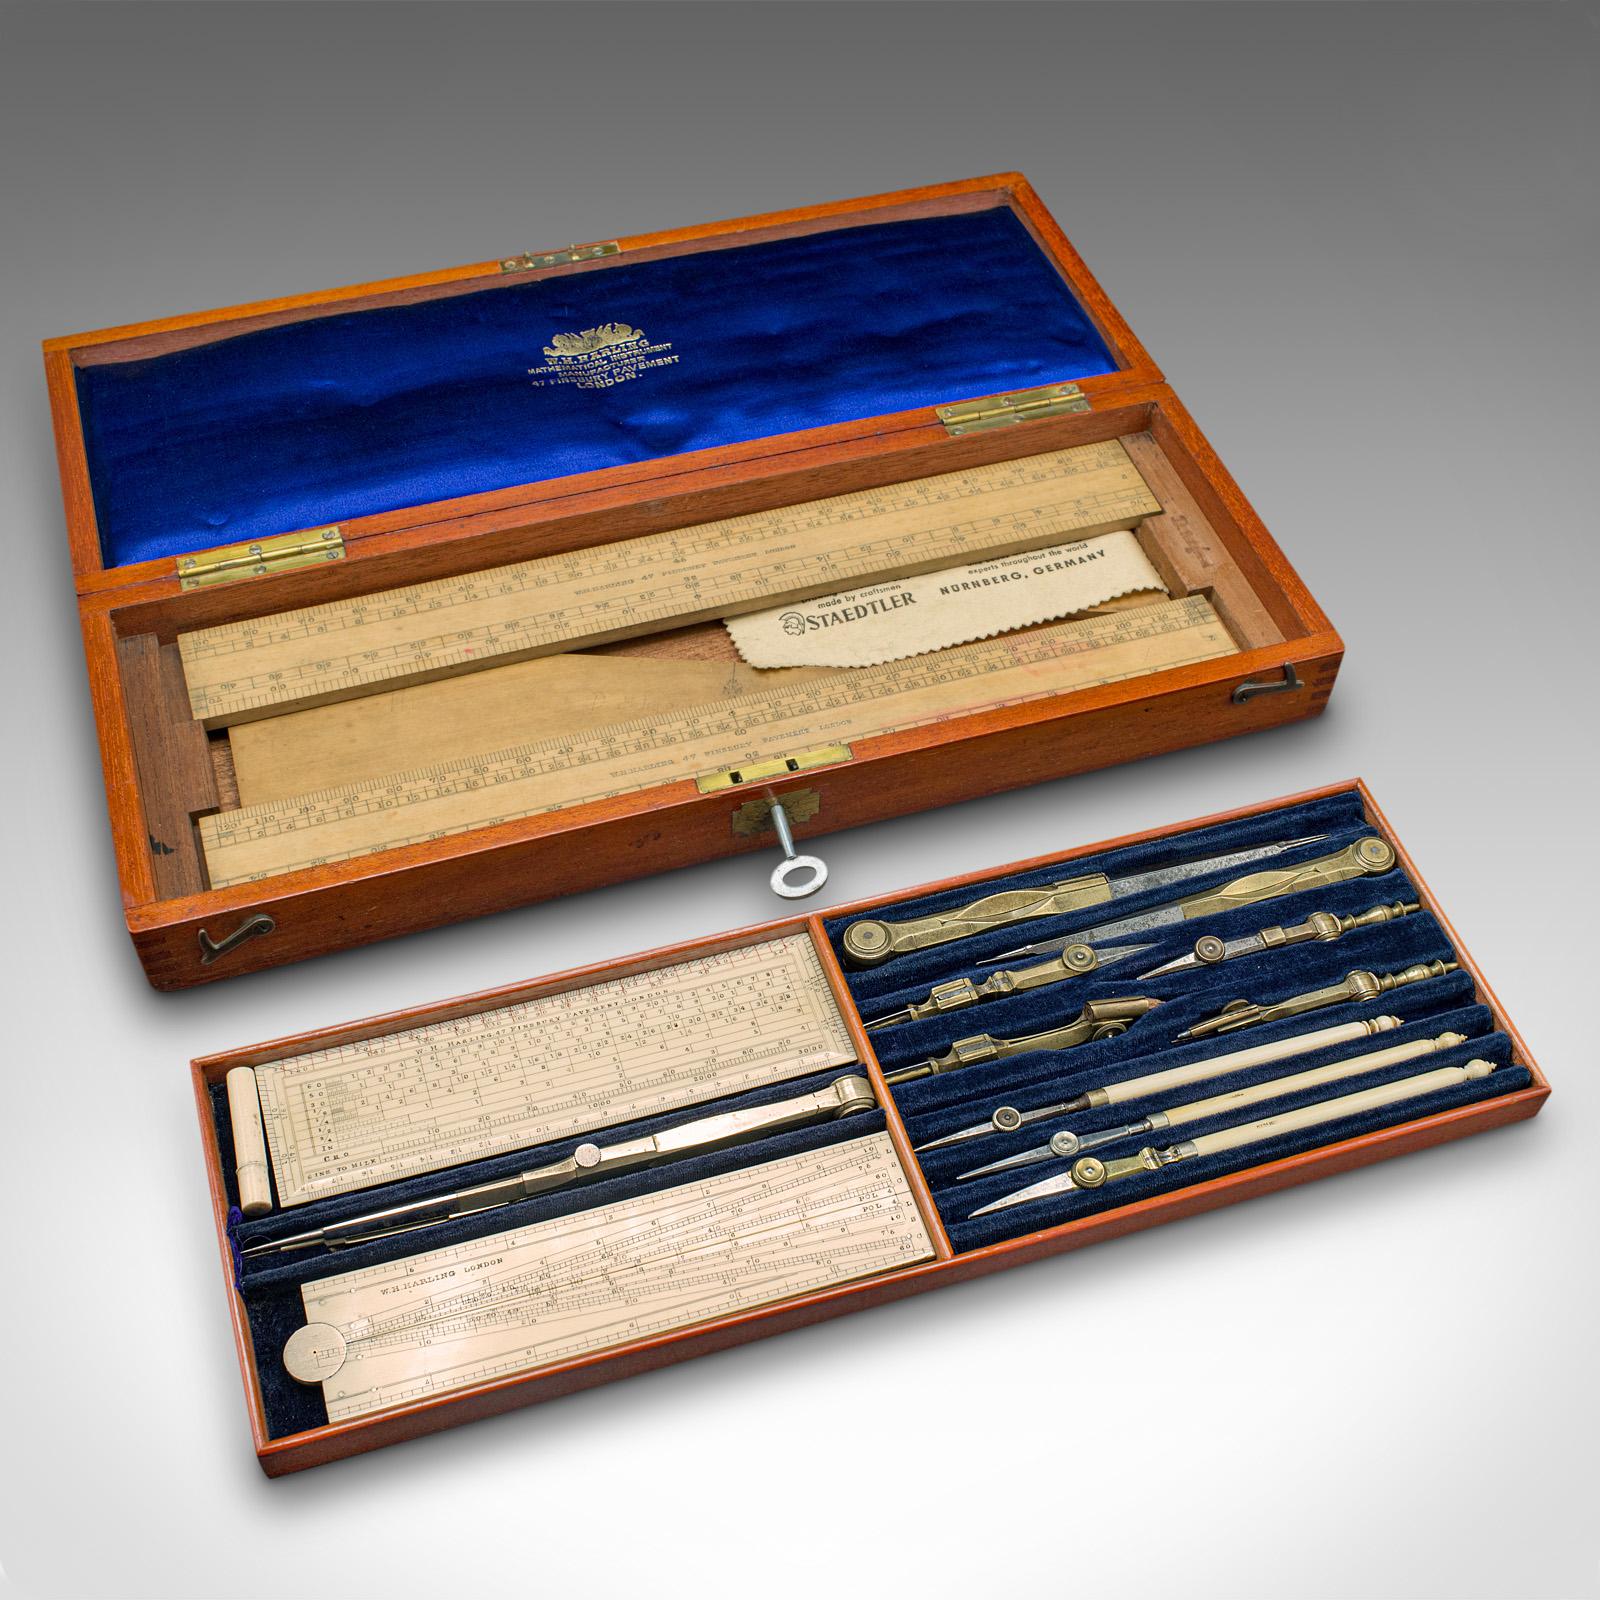 This is an antique master draughtsman's tool set. An English, case of cartographer's drawing instruments, dating to the Edwardian period, circa 1910.

Comprehensive set of 17 pieces, presented in a quality case
Displaying a desirable aged patina and